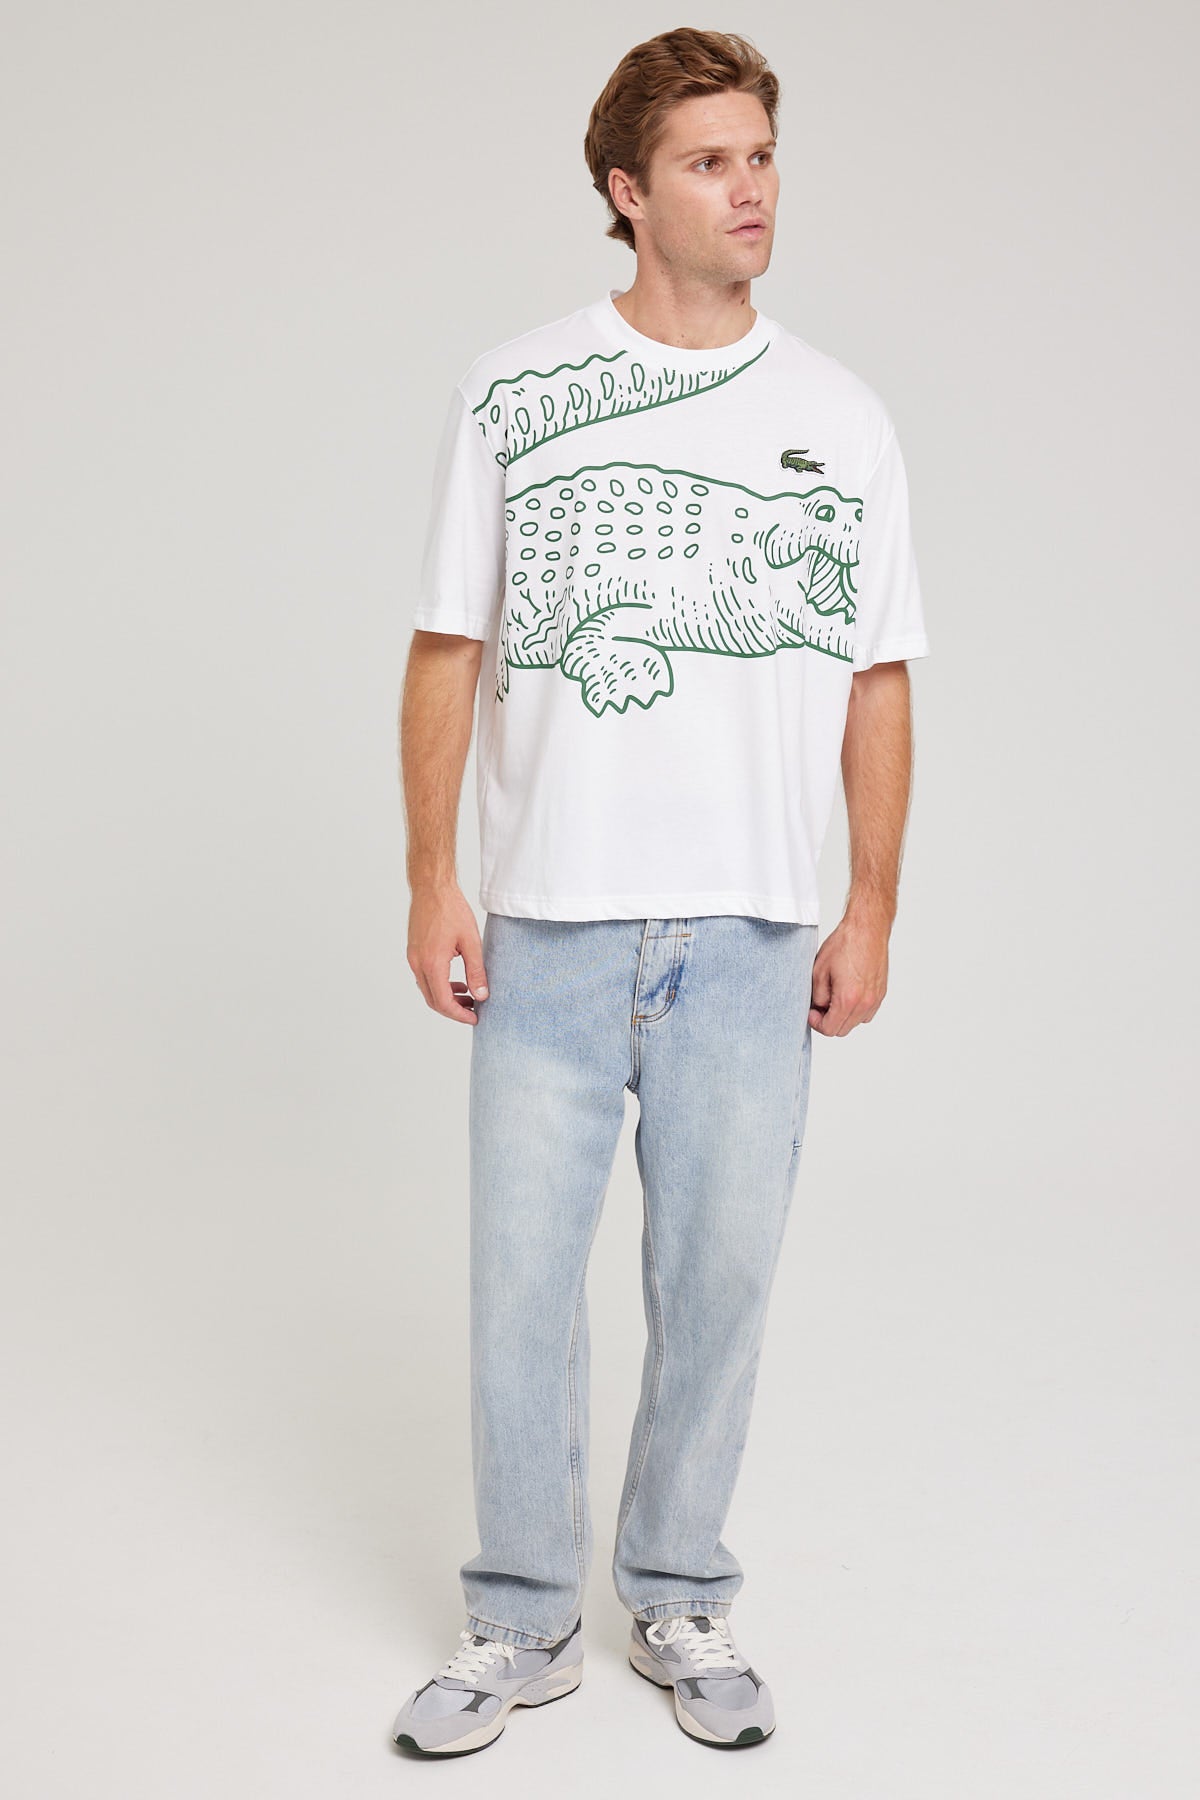 Lacoste Big Croc Loose Fit Tee White